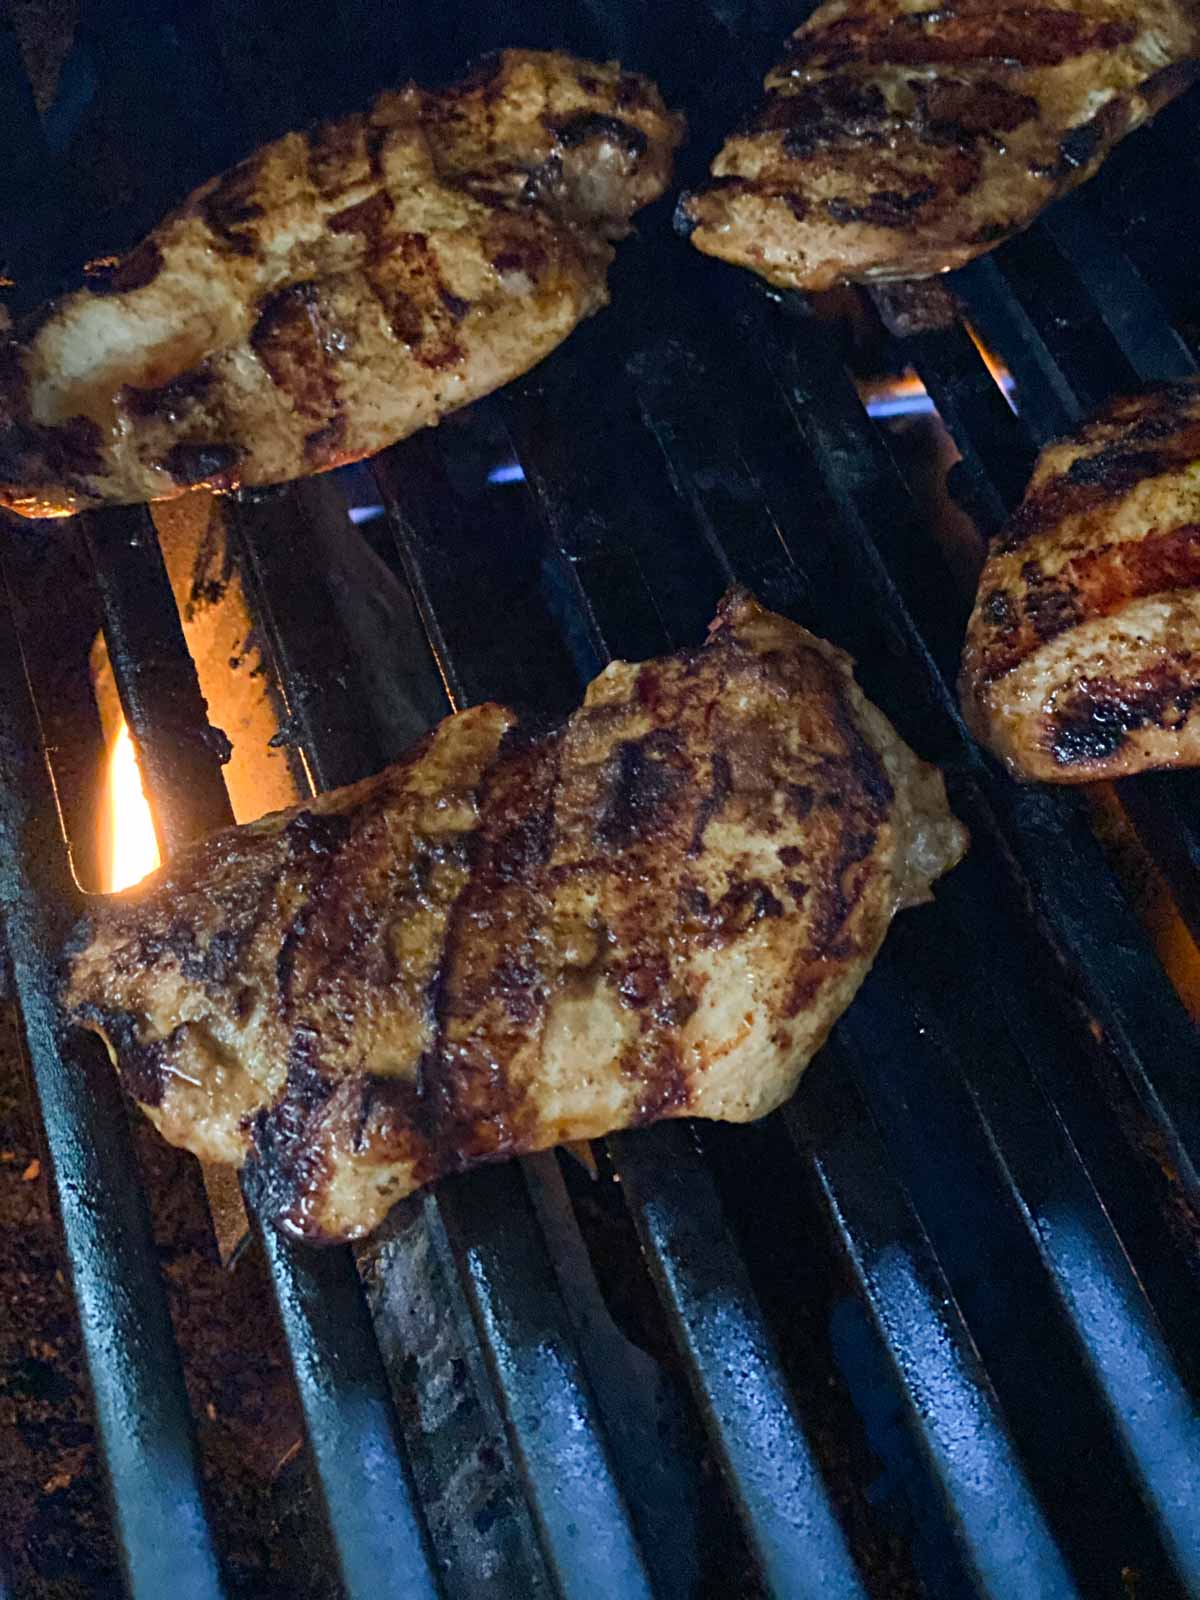 Grilled chicken showing grill marks.